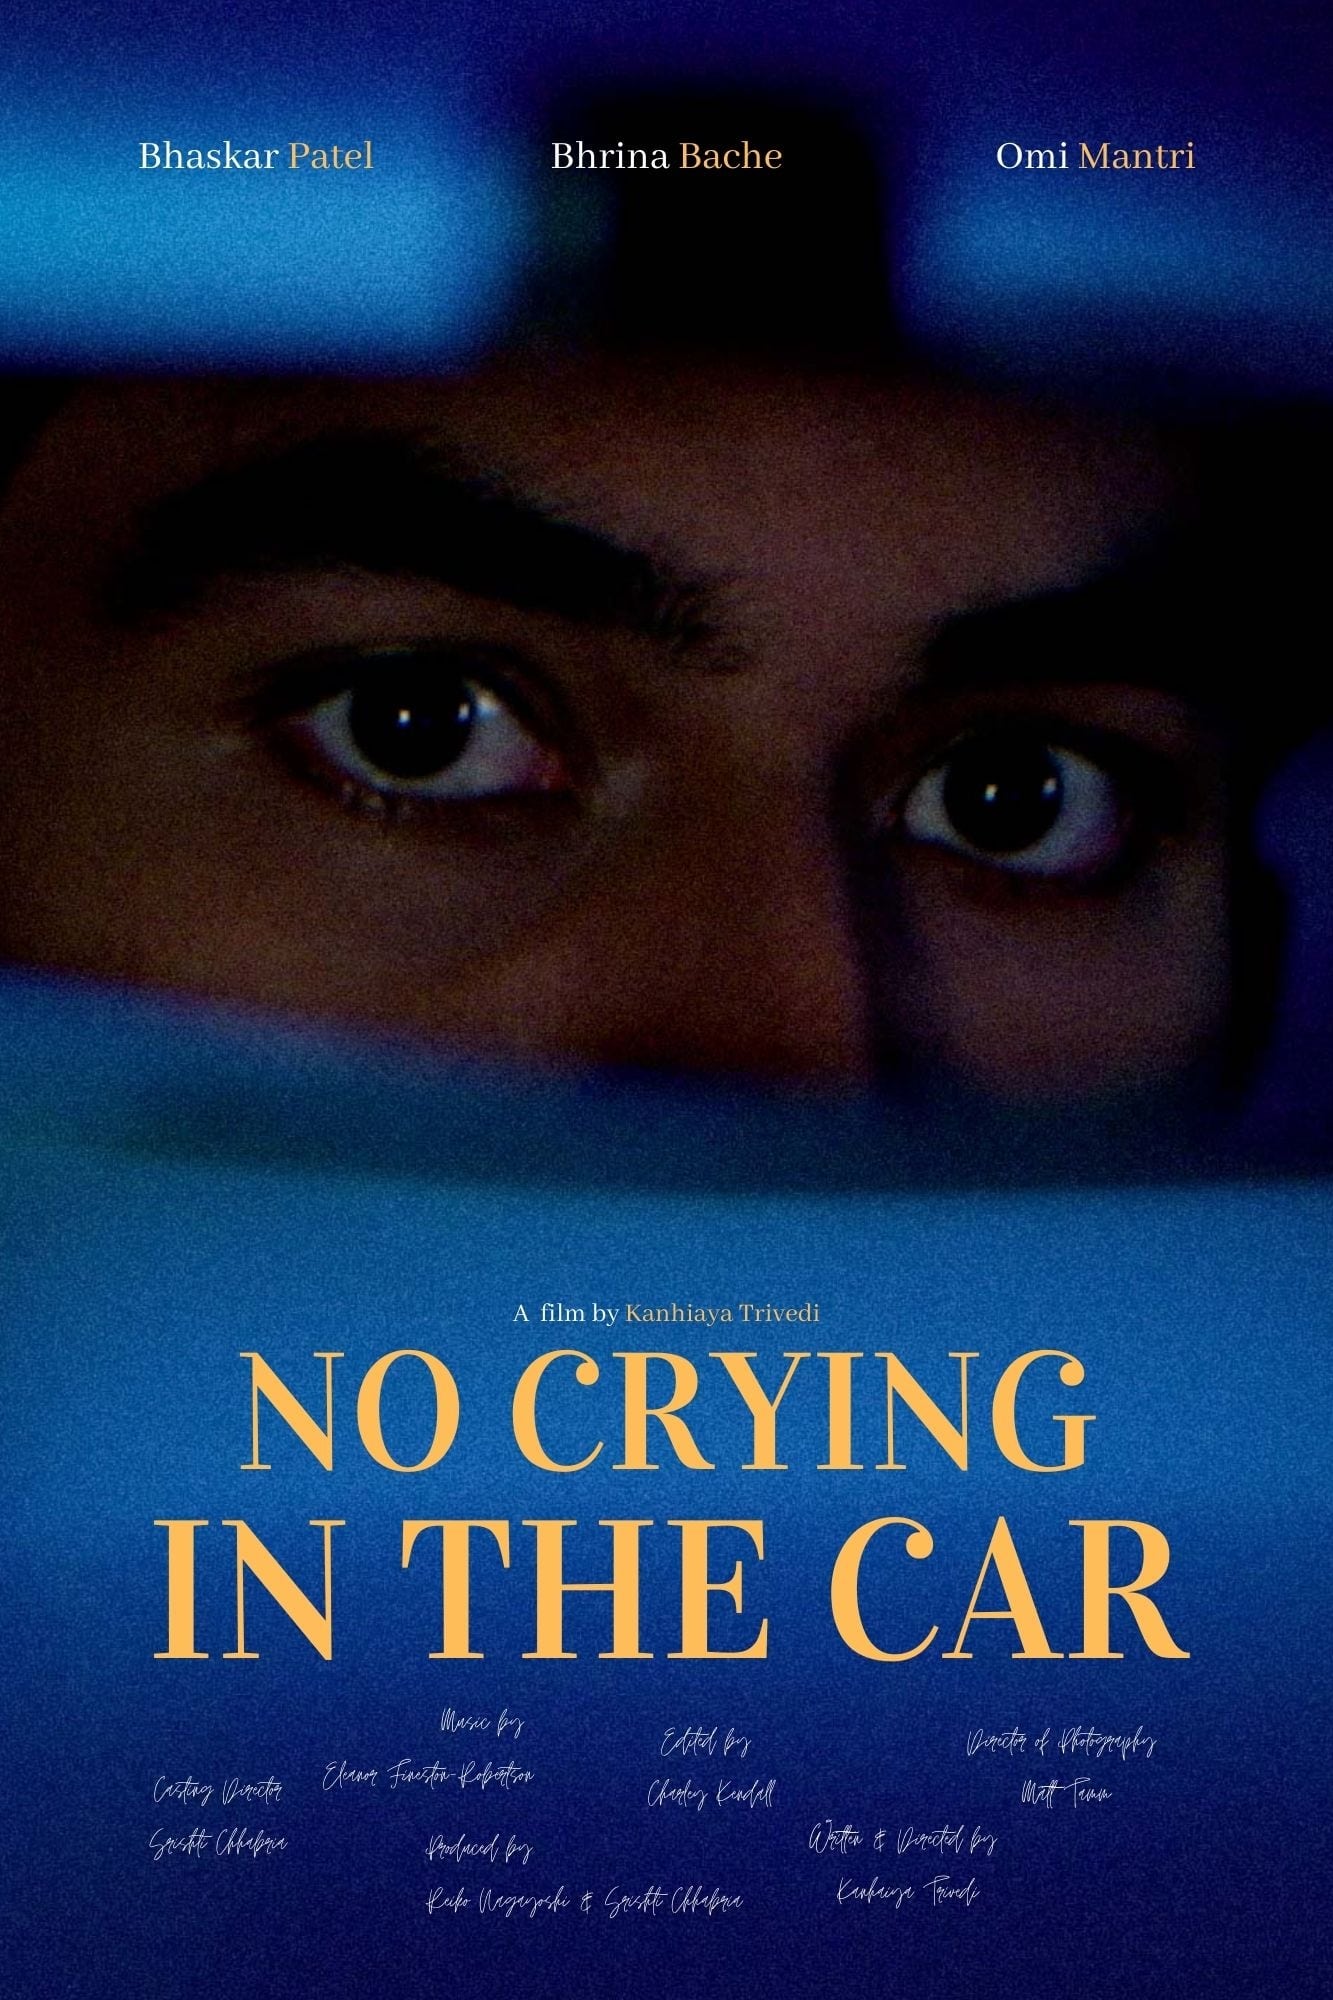 No Crying in the Car